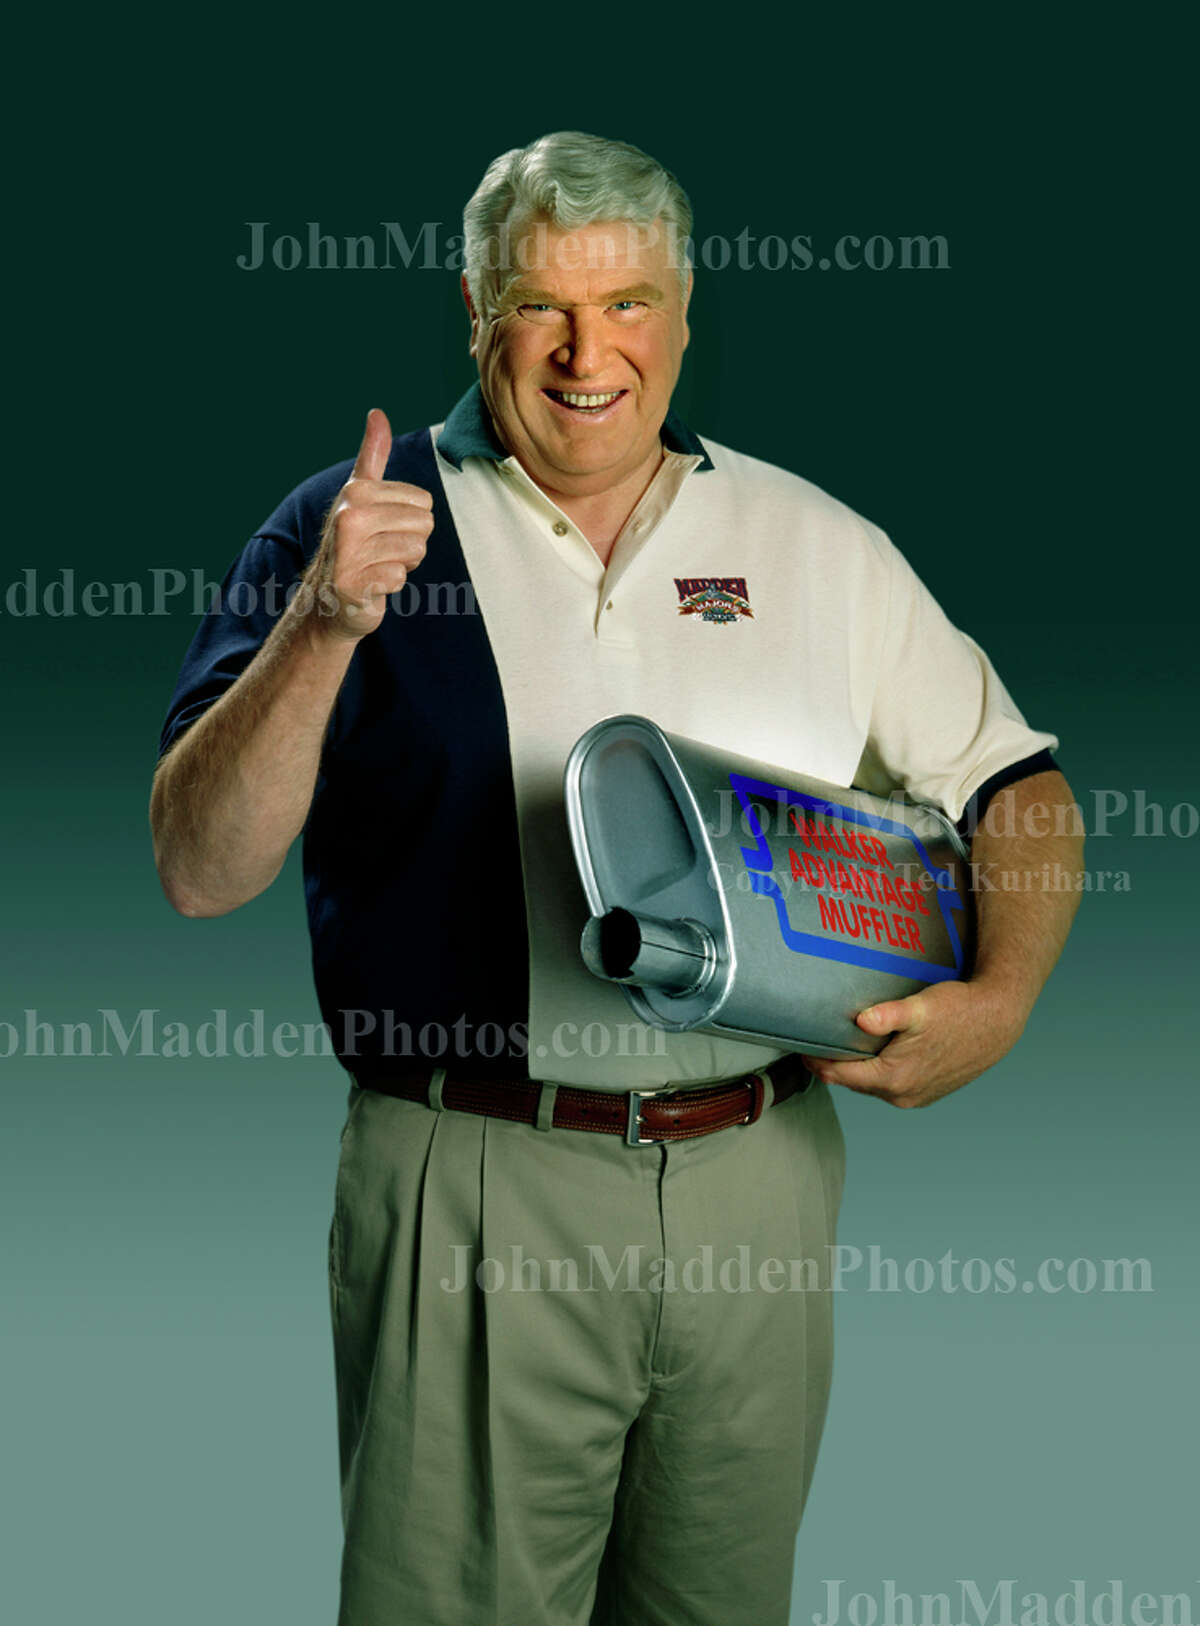 John Madden taking part in one of his many 90s photo shoots orchestrated by Ted Kurihara, who now owns the JohnMaddenPhotos.com website.